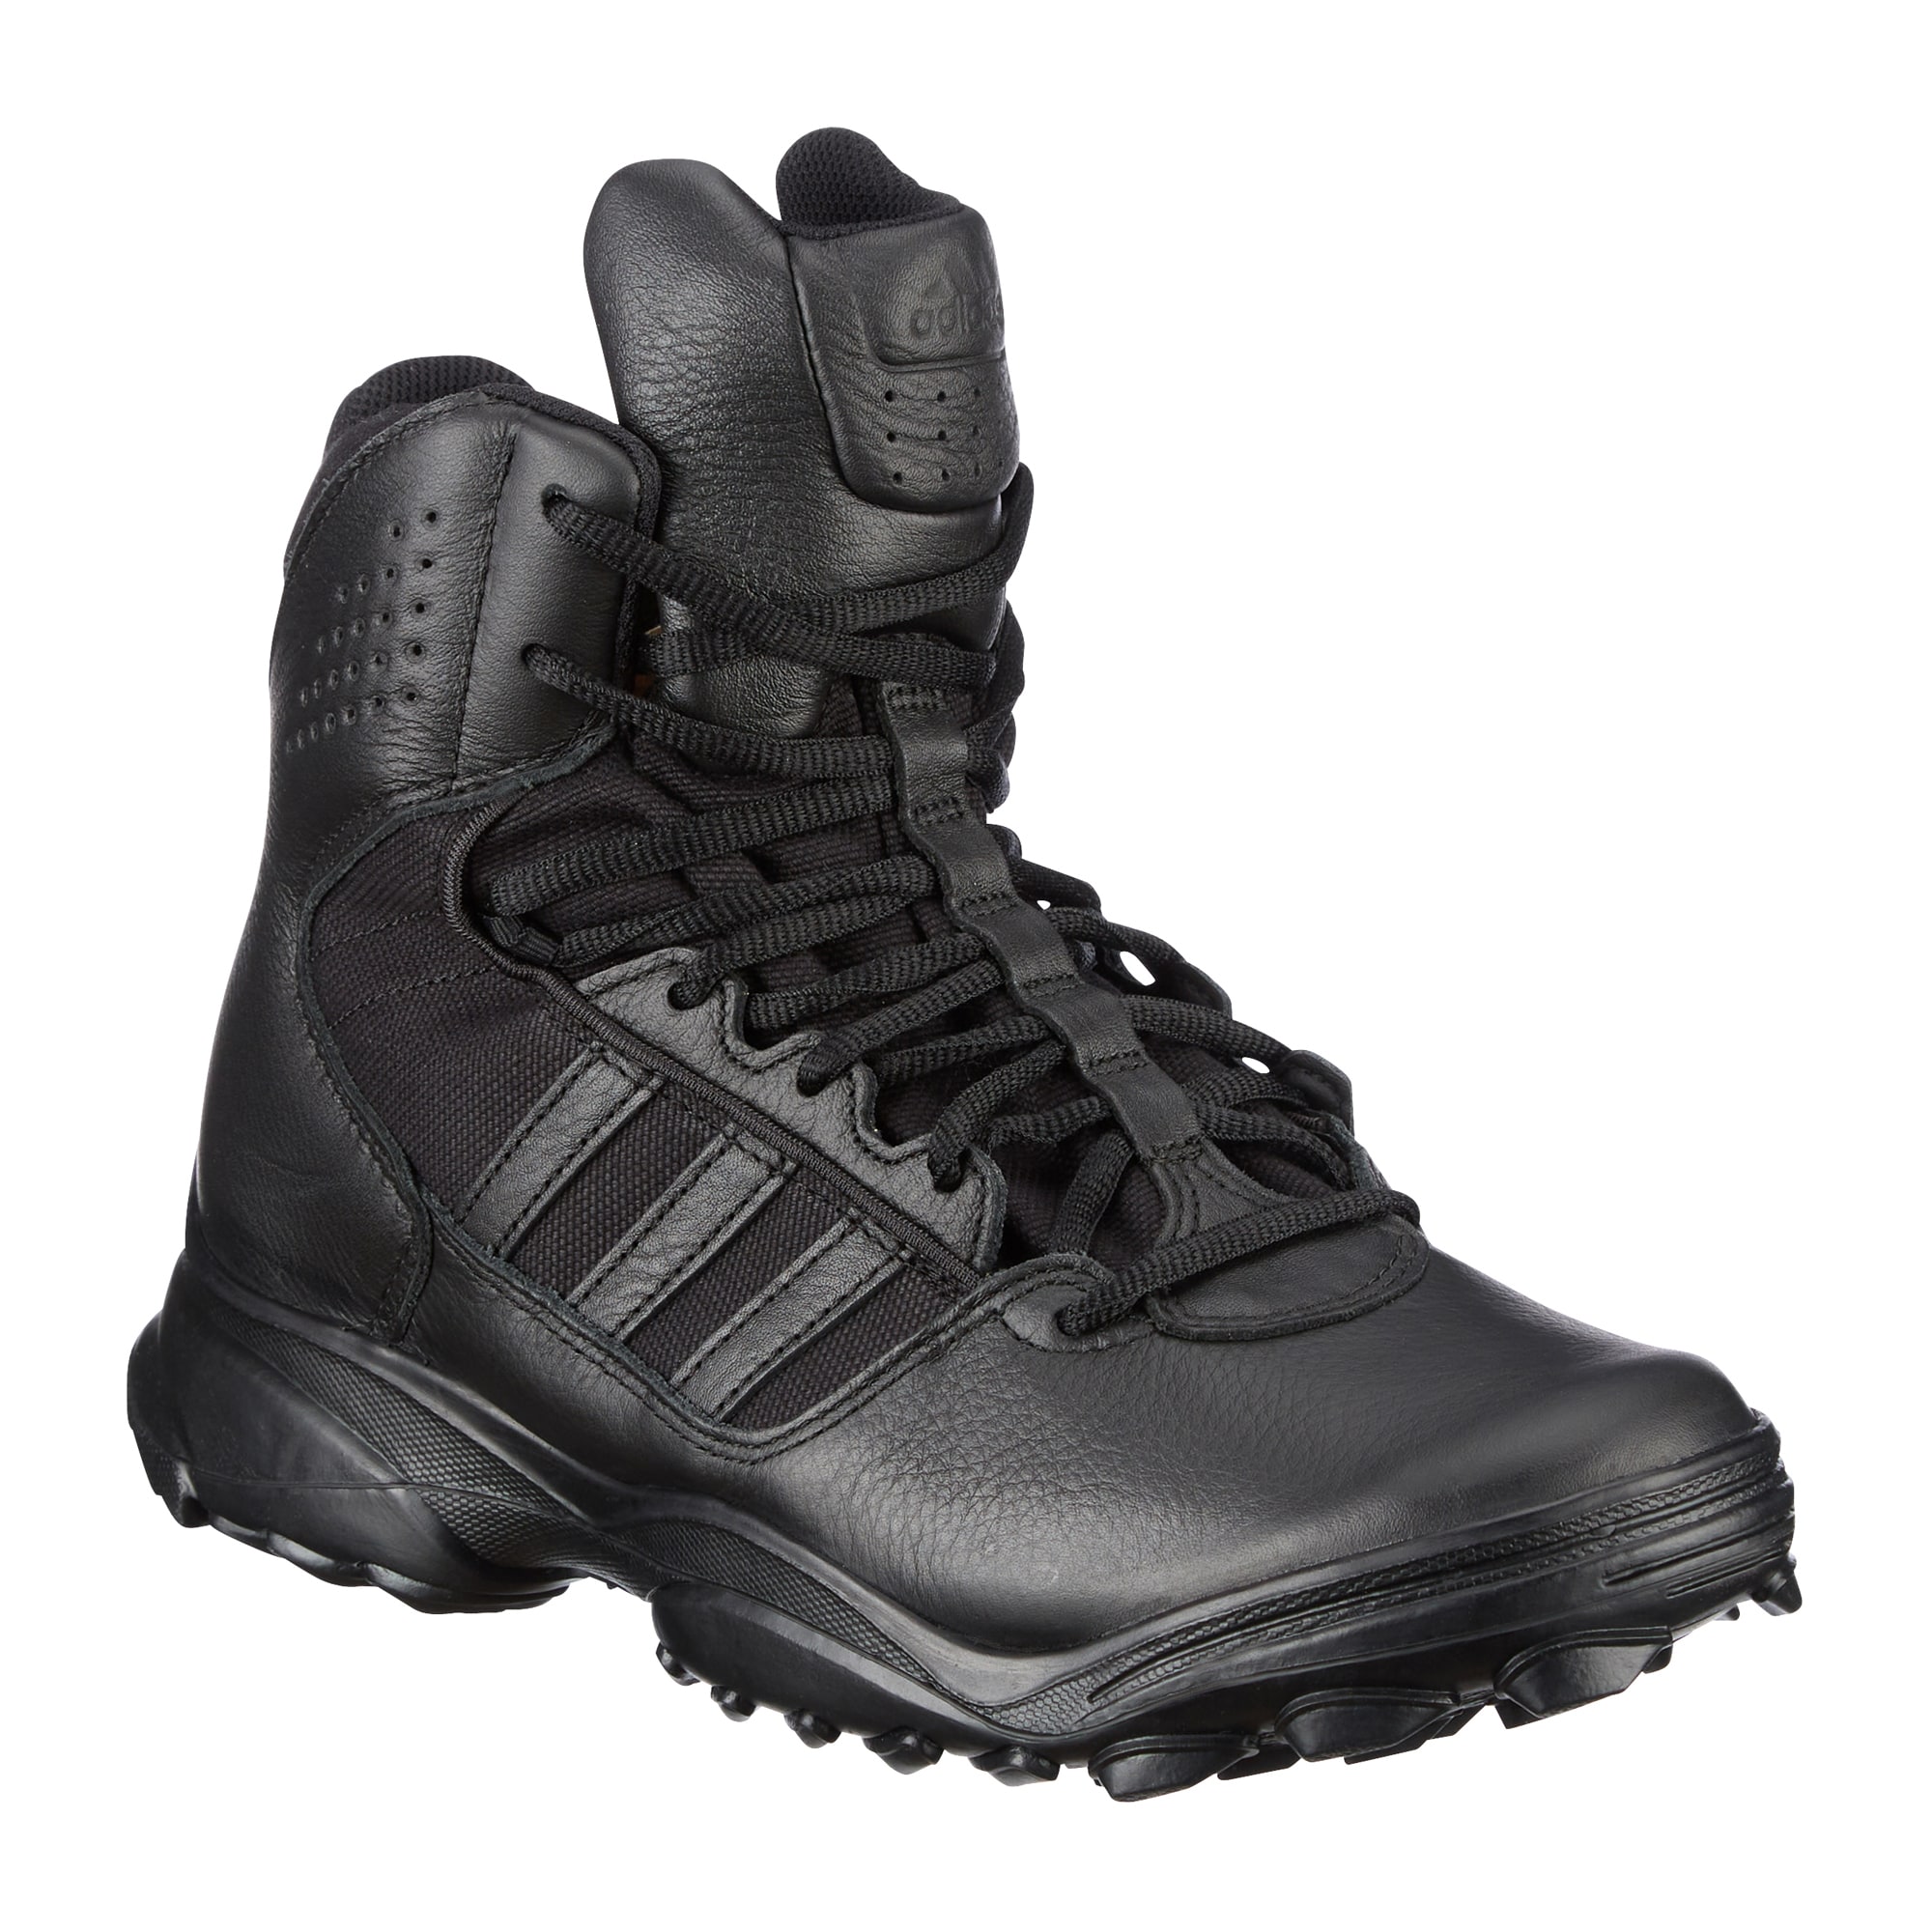 adidas gsg9 boots for sale